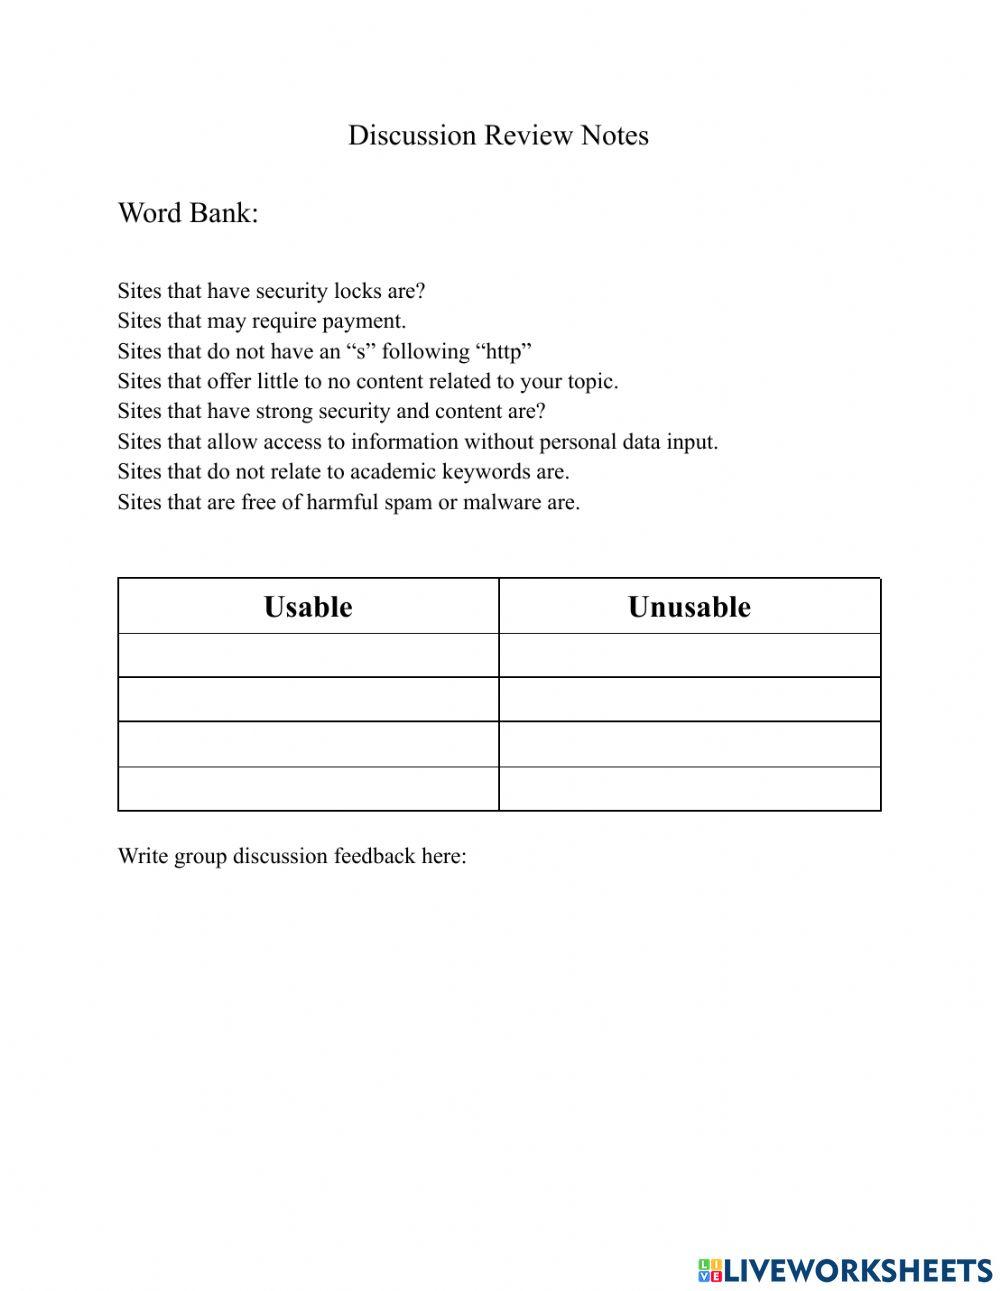 Discussion Review Notesheet